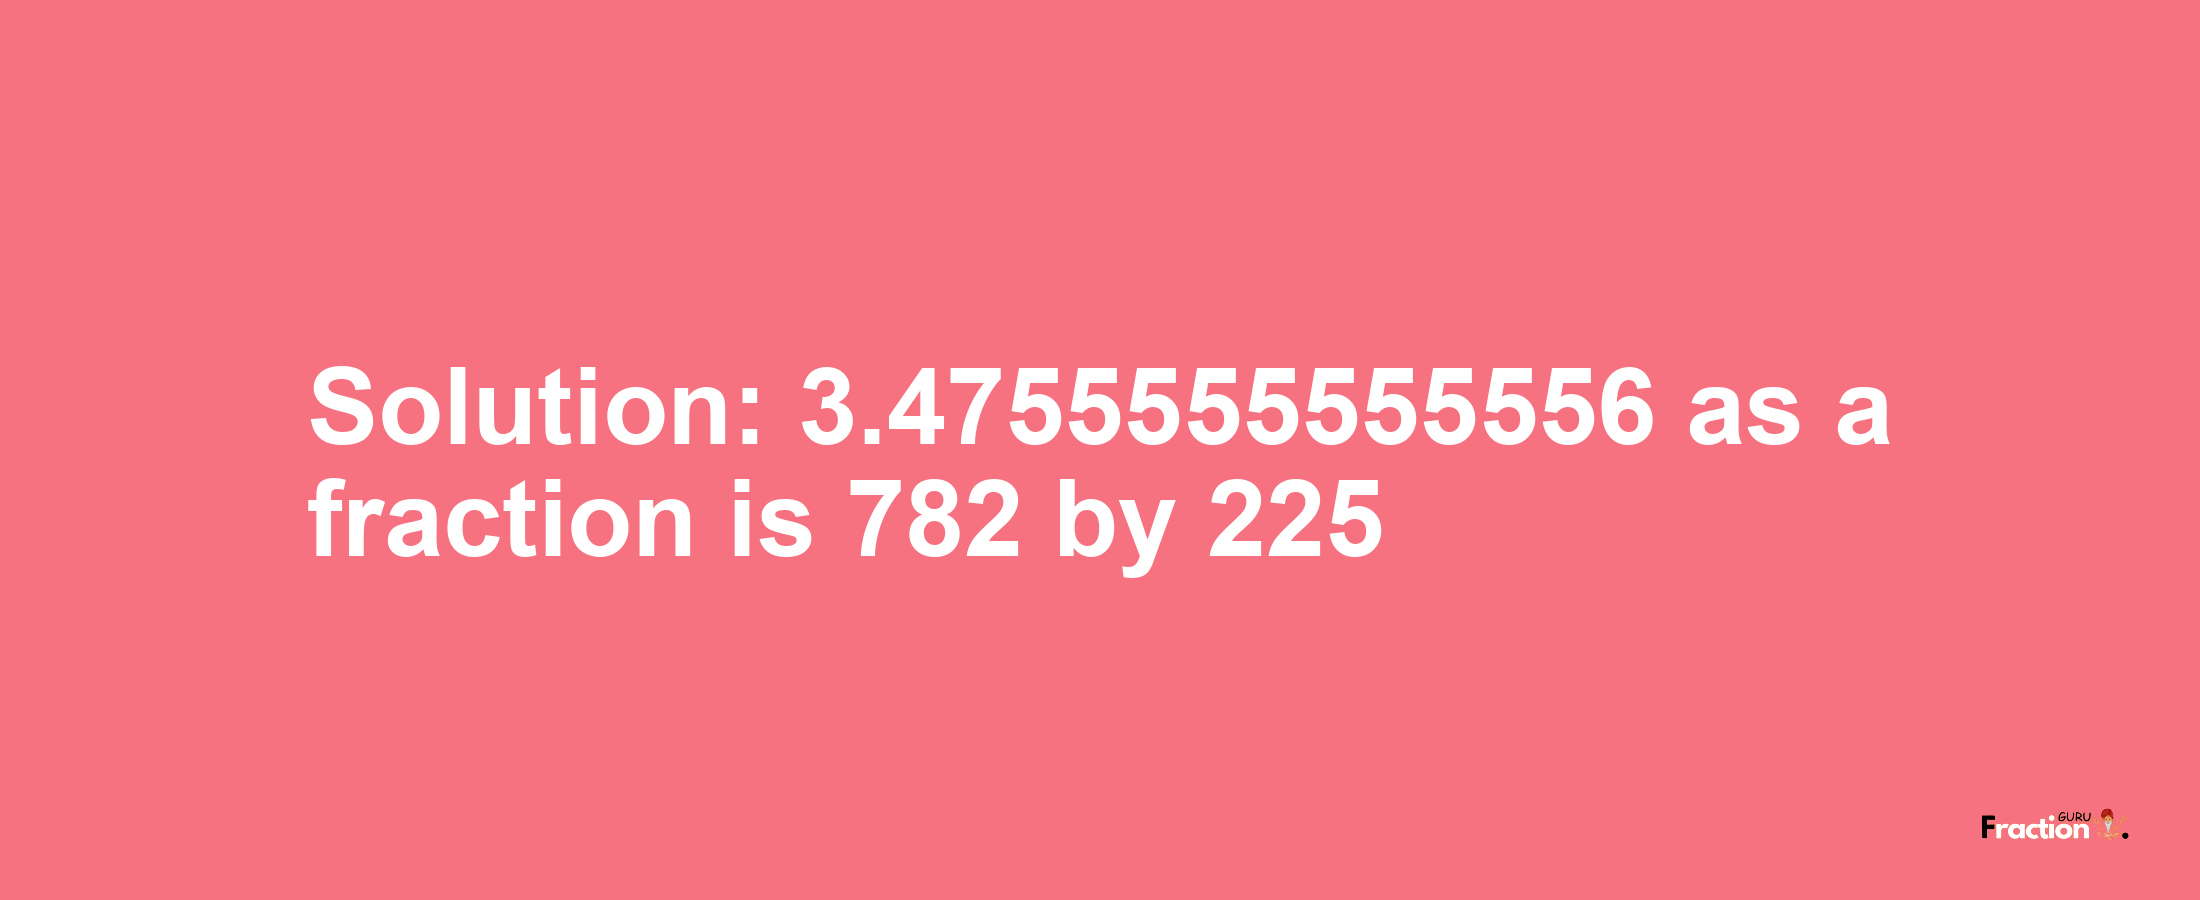 Solution:3.4755555555556 as a fraction is 782/225